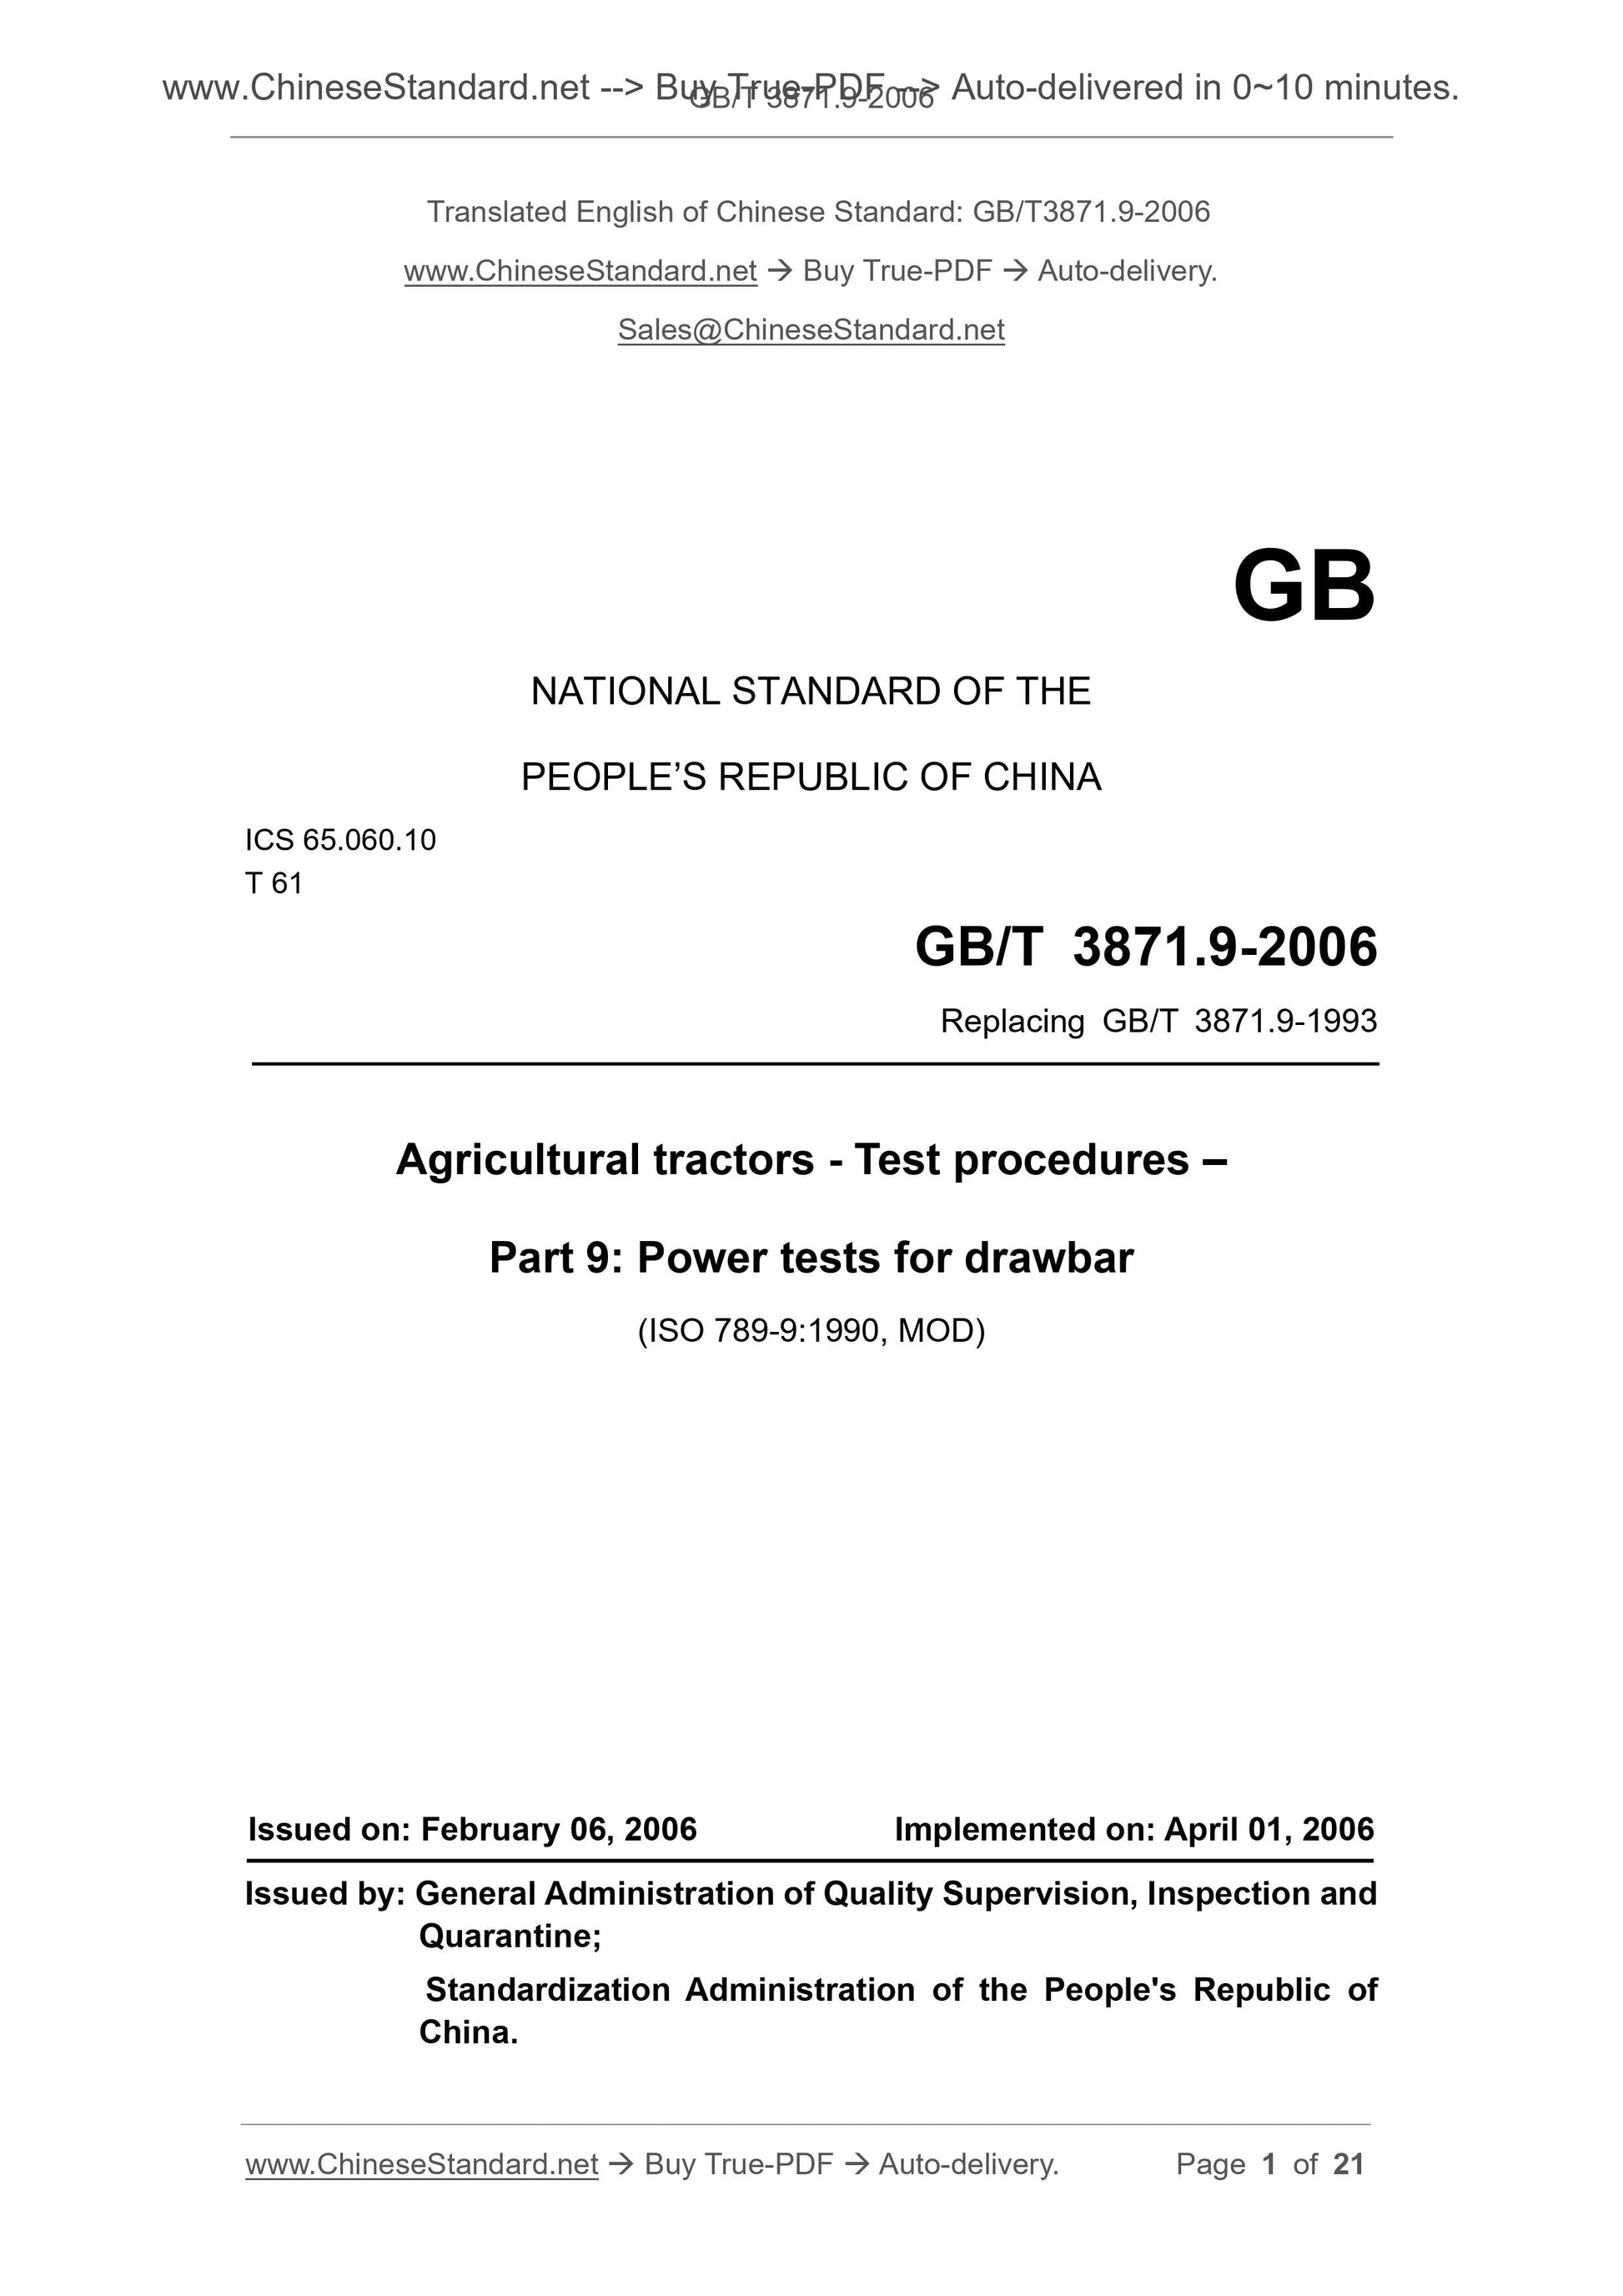 GB/T 3871.9-2006 Page 1